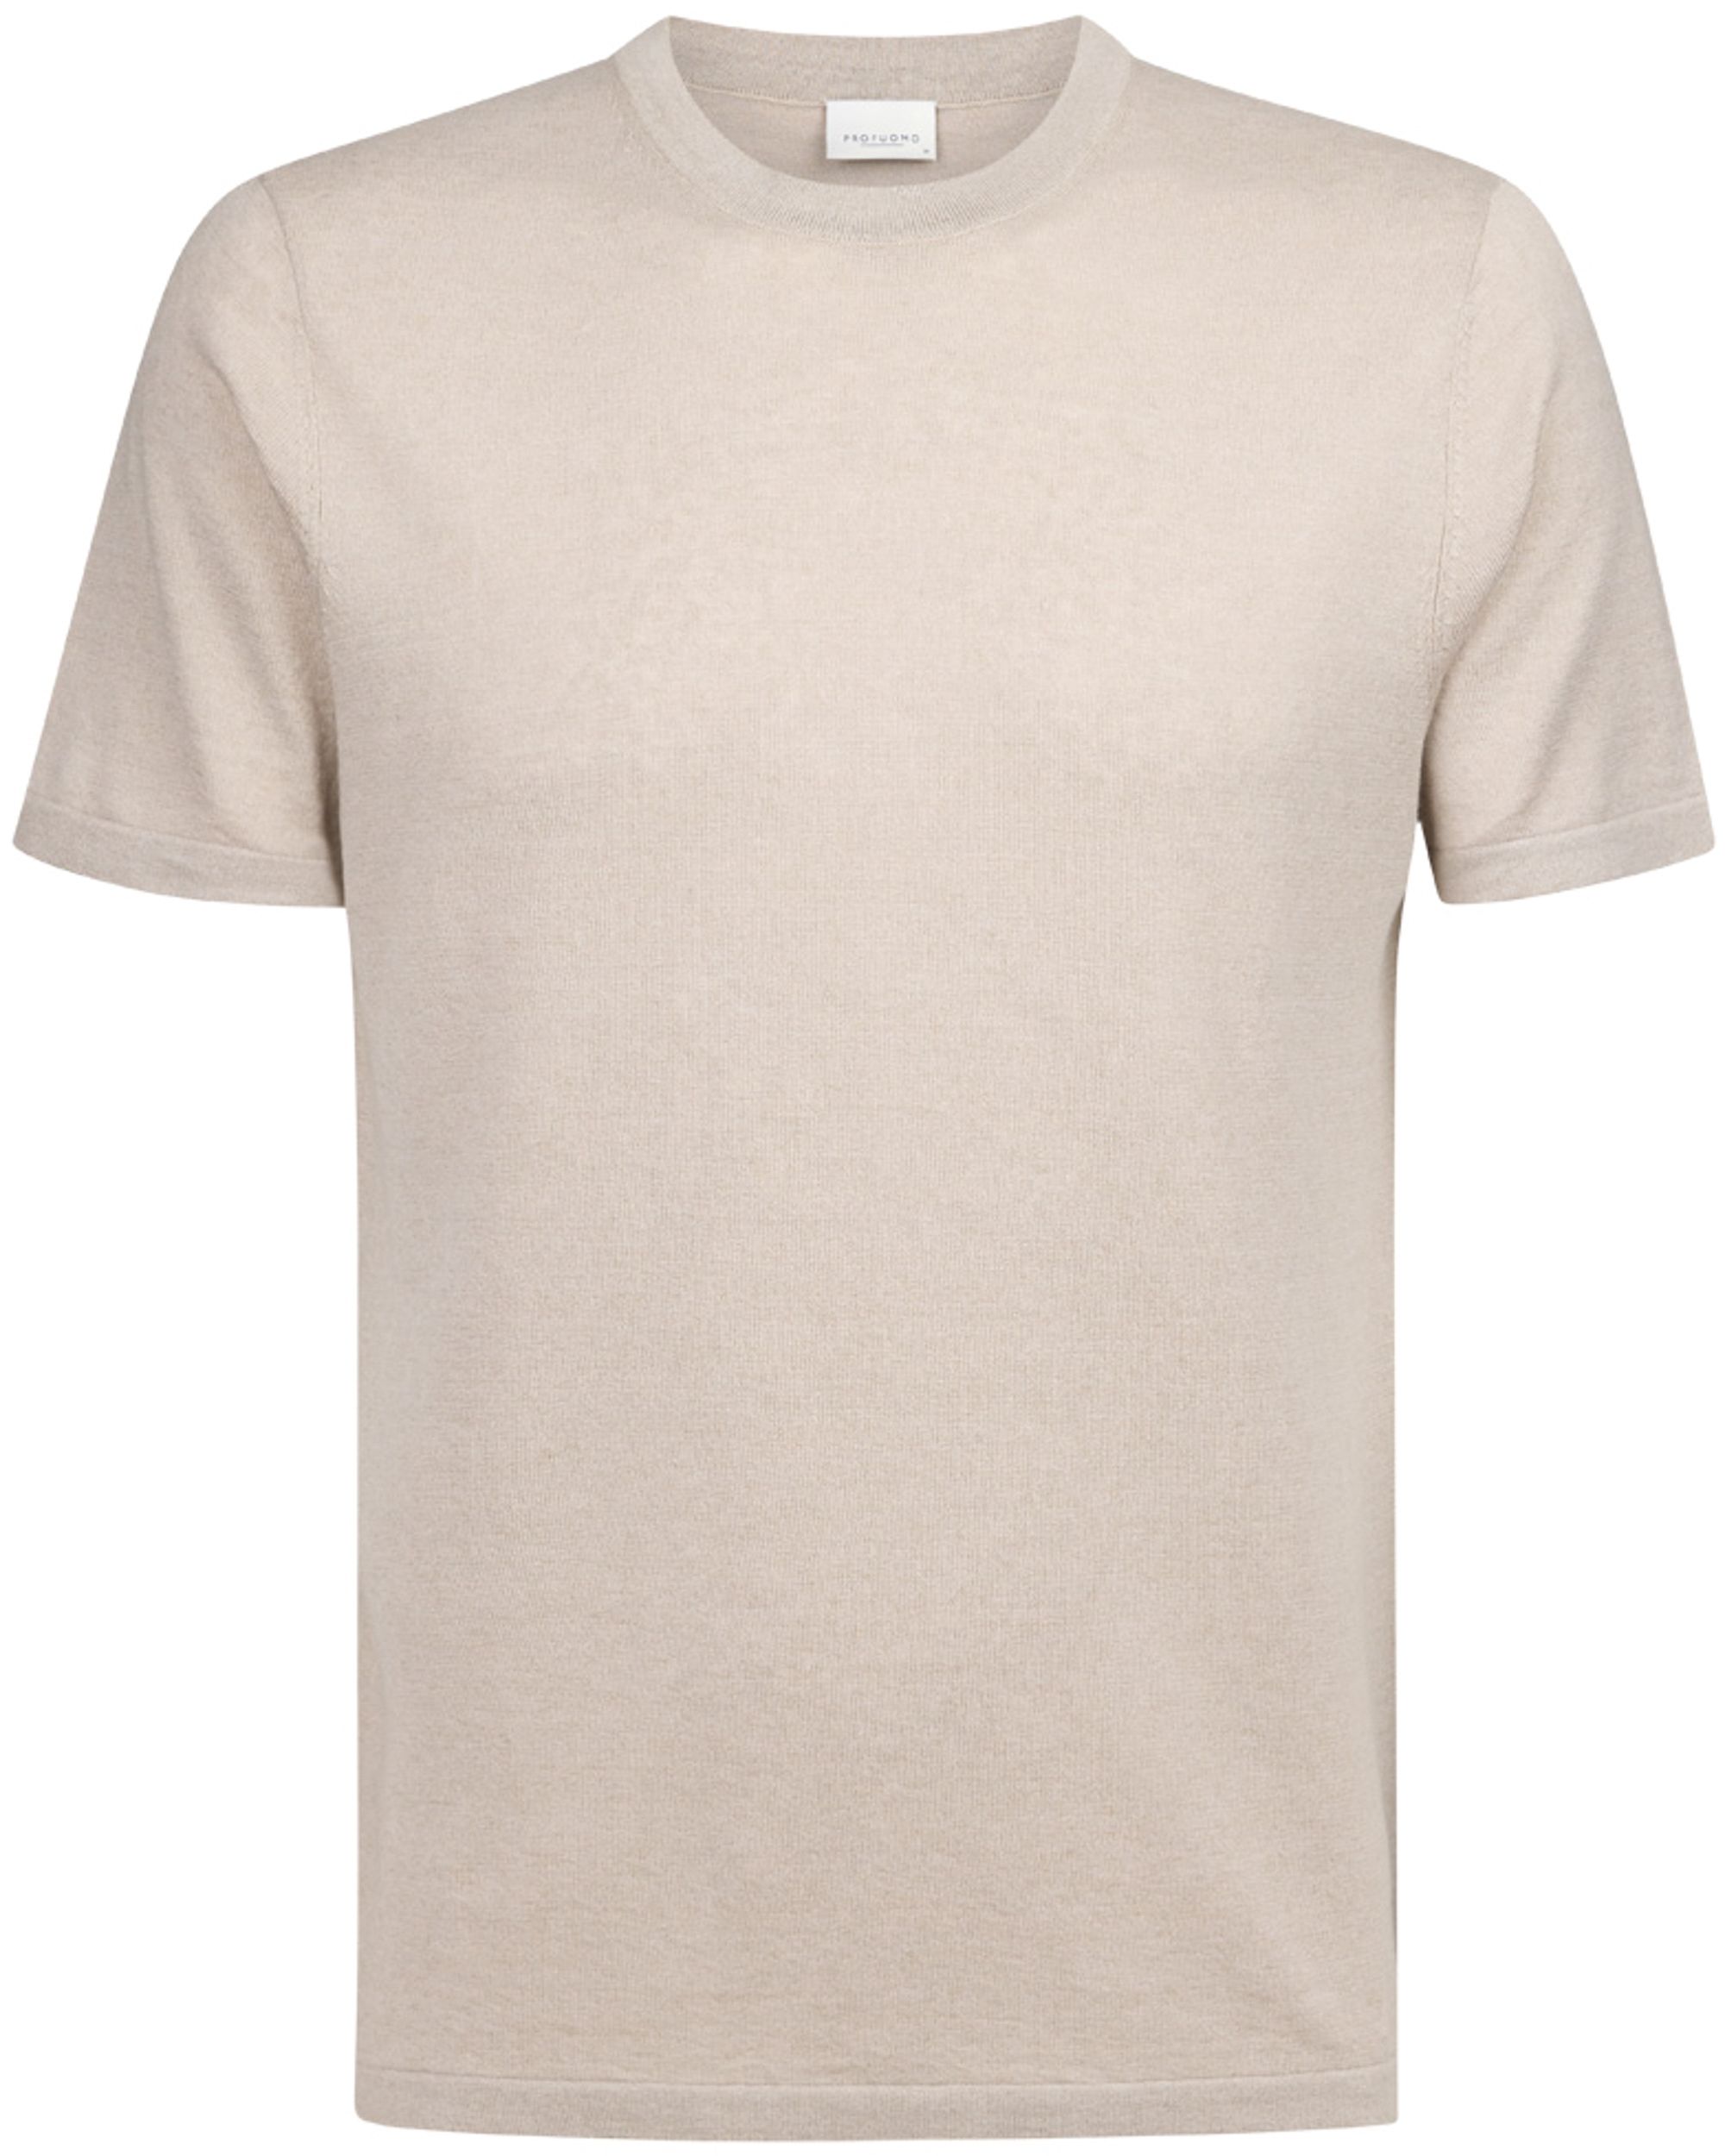 Profuomo T-shirt KM Donker rood 094176-001-L